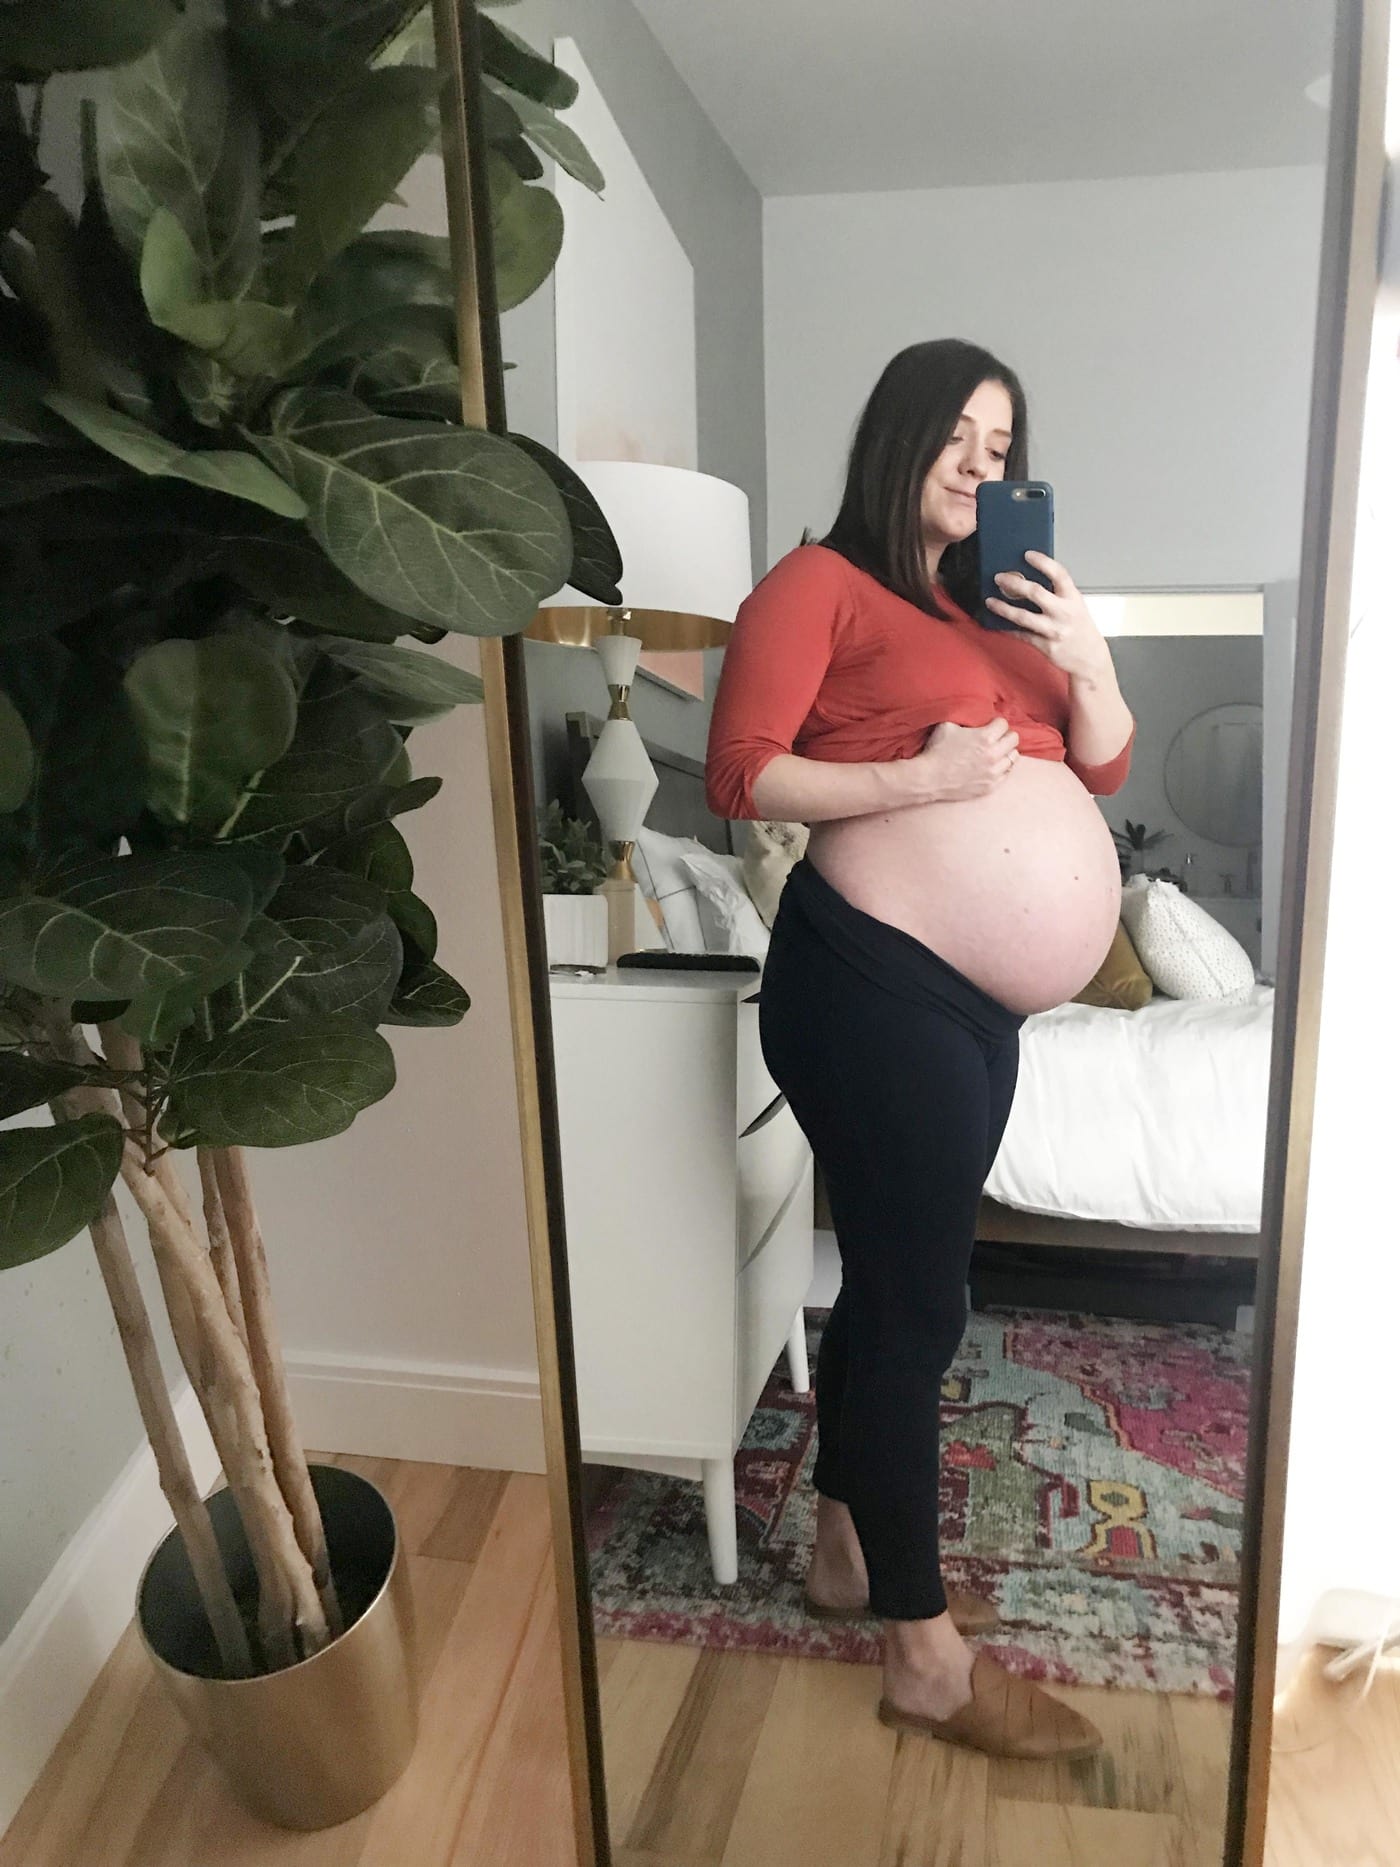 Little Sugar & Cloth: My Third Trimester Update & Antepartum Depression by top Houston lifestyle blogger Ashley Rose of Sugar and Cloth